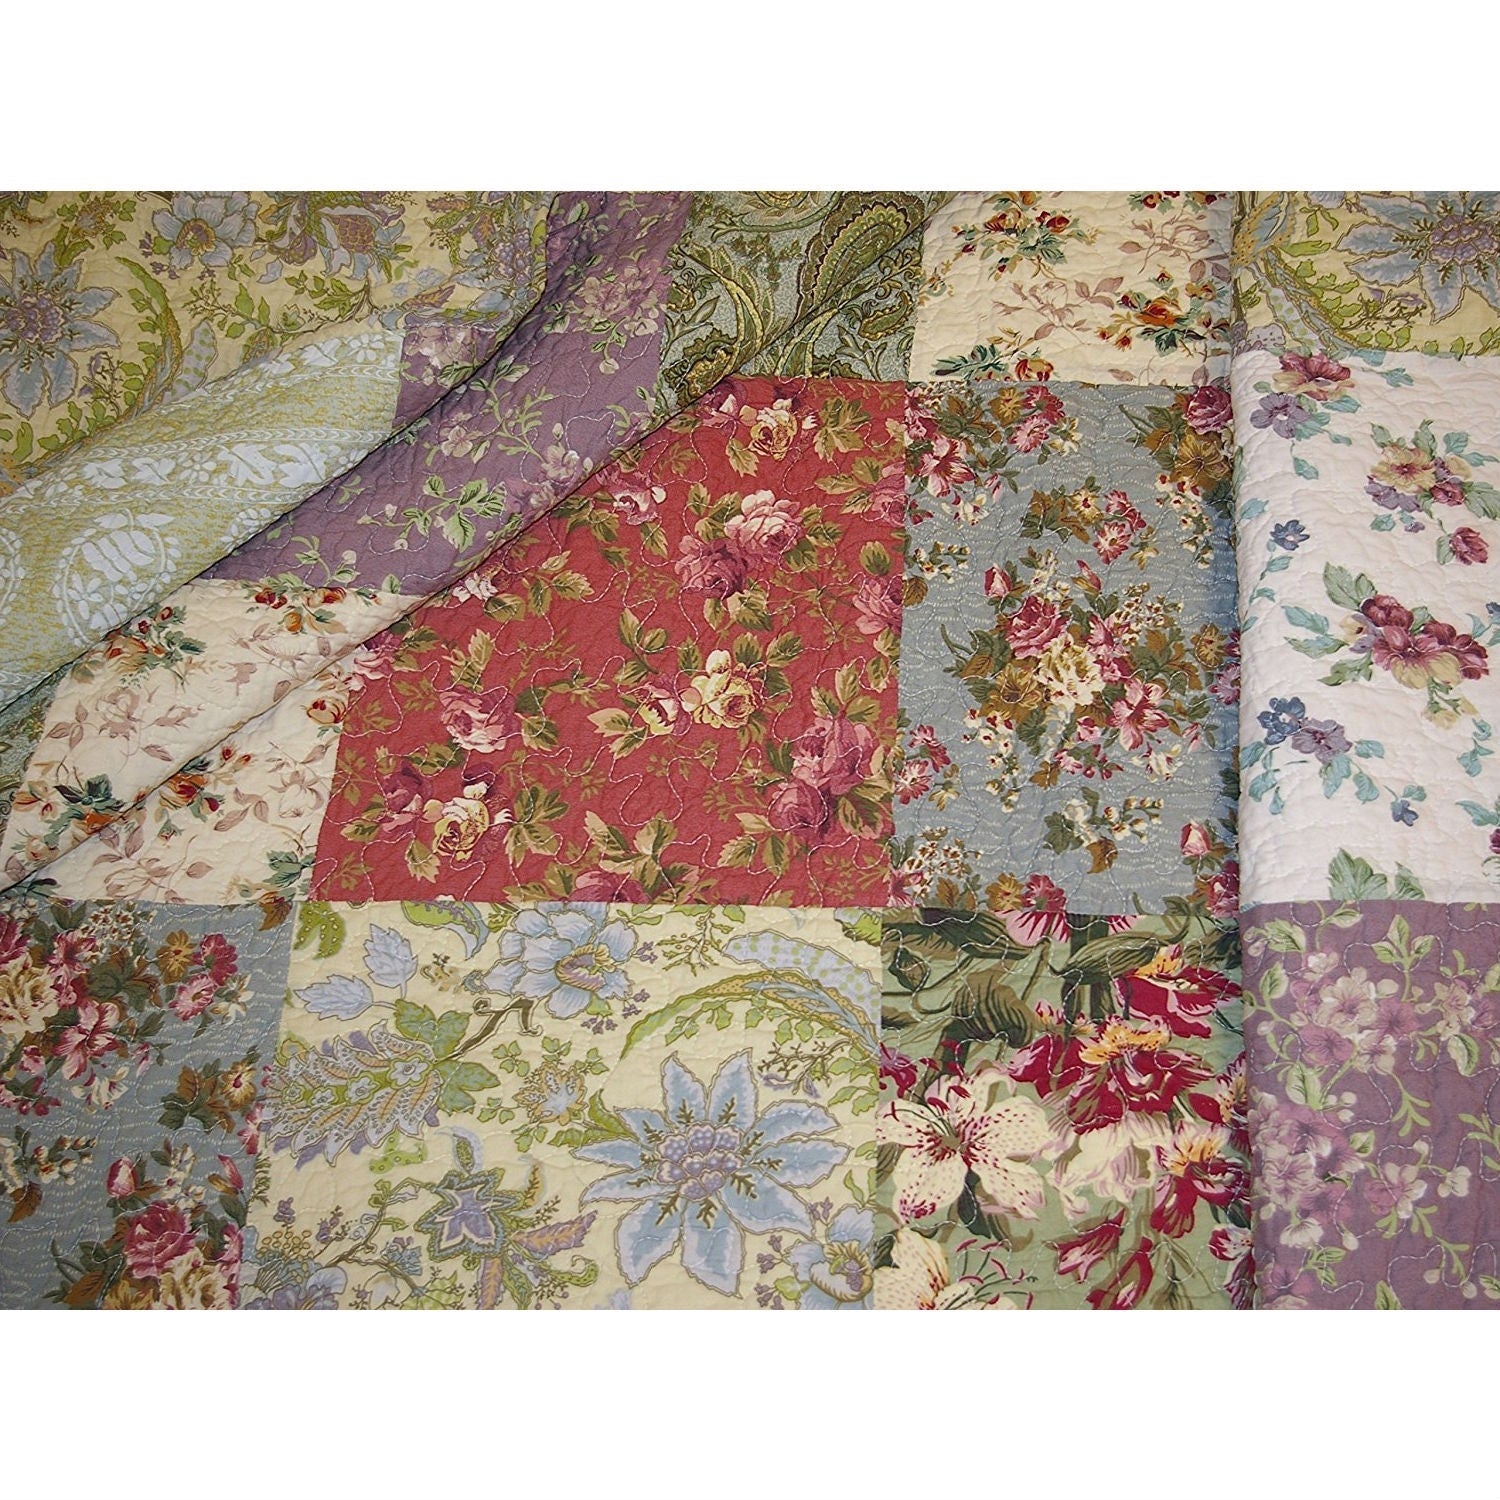 Bedroom > Quilts & Blankets - Red Green Blue Purple Yellow White 100-Percent Cotton Floral Patchwork Quilt Throw Blanket